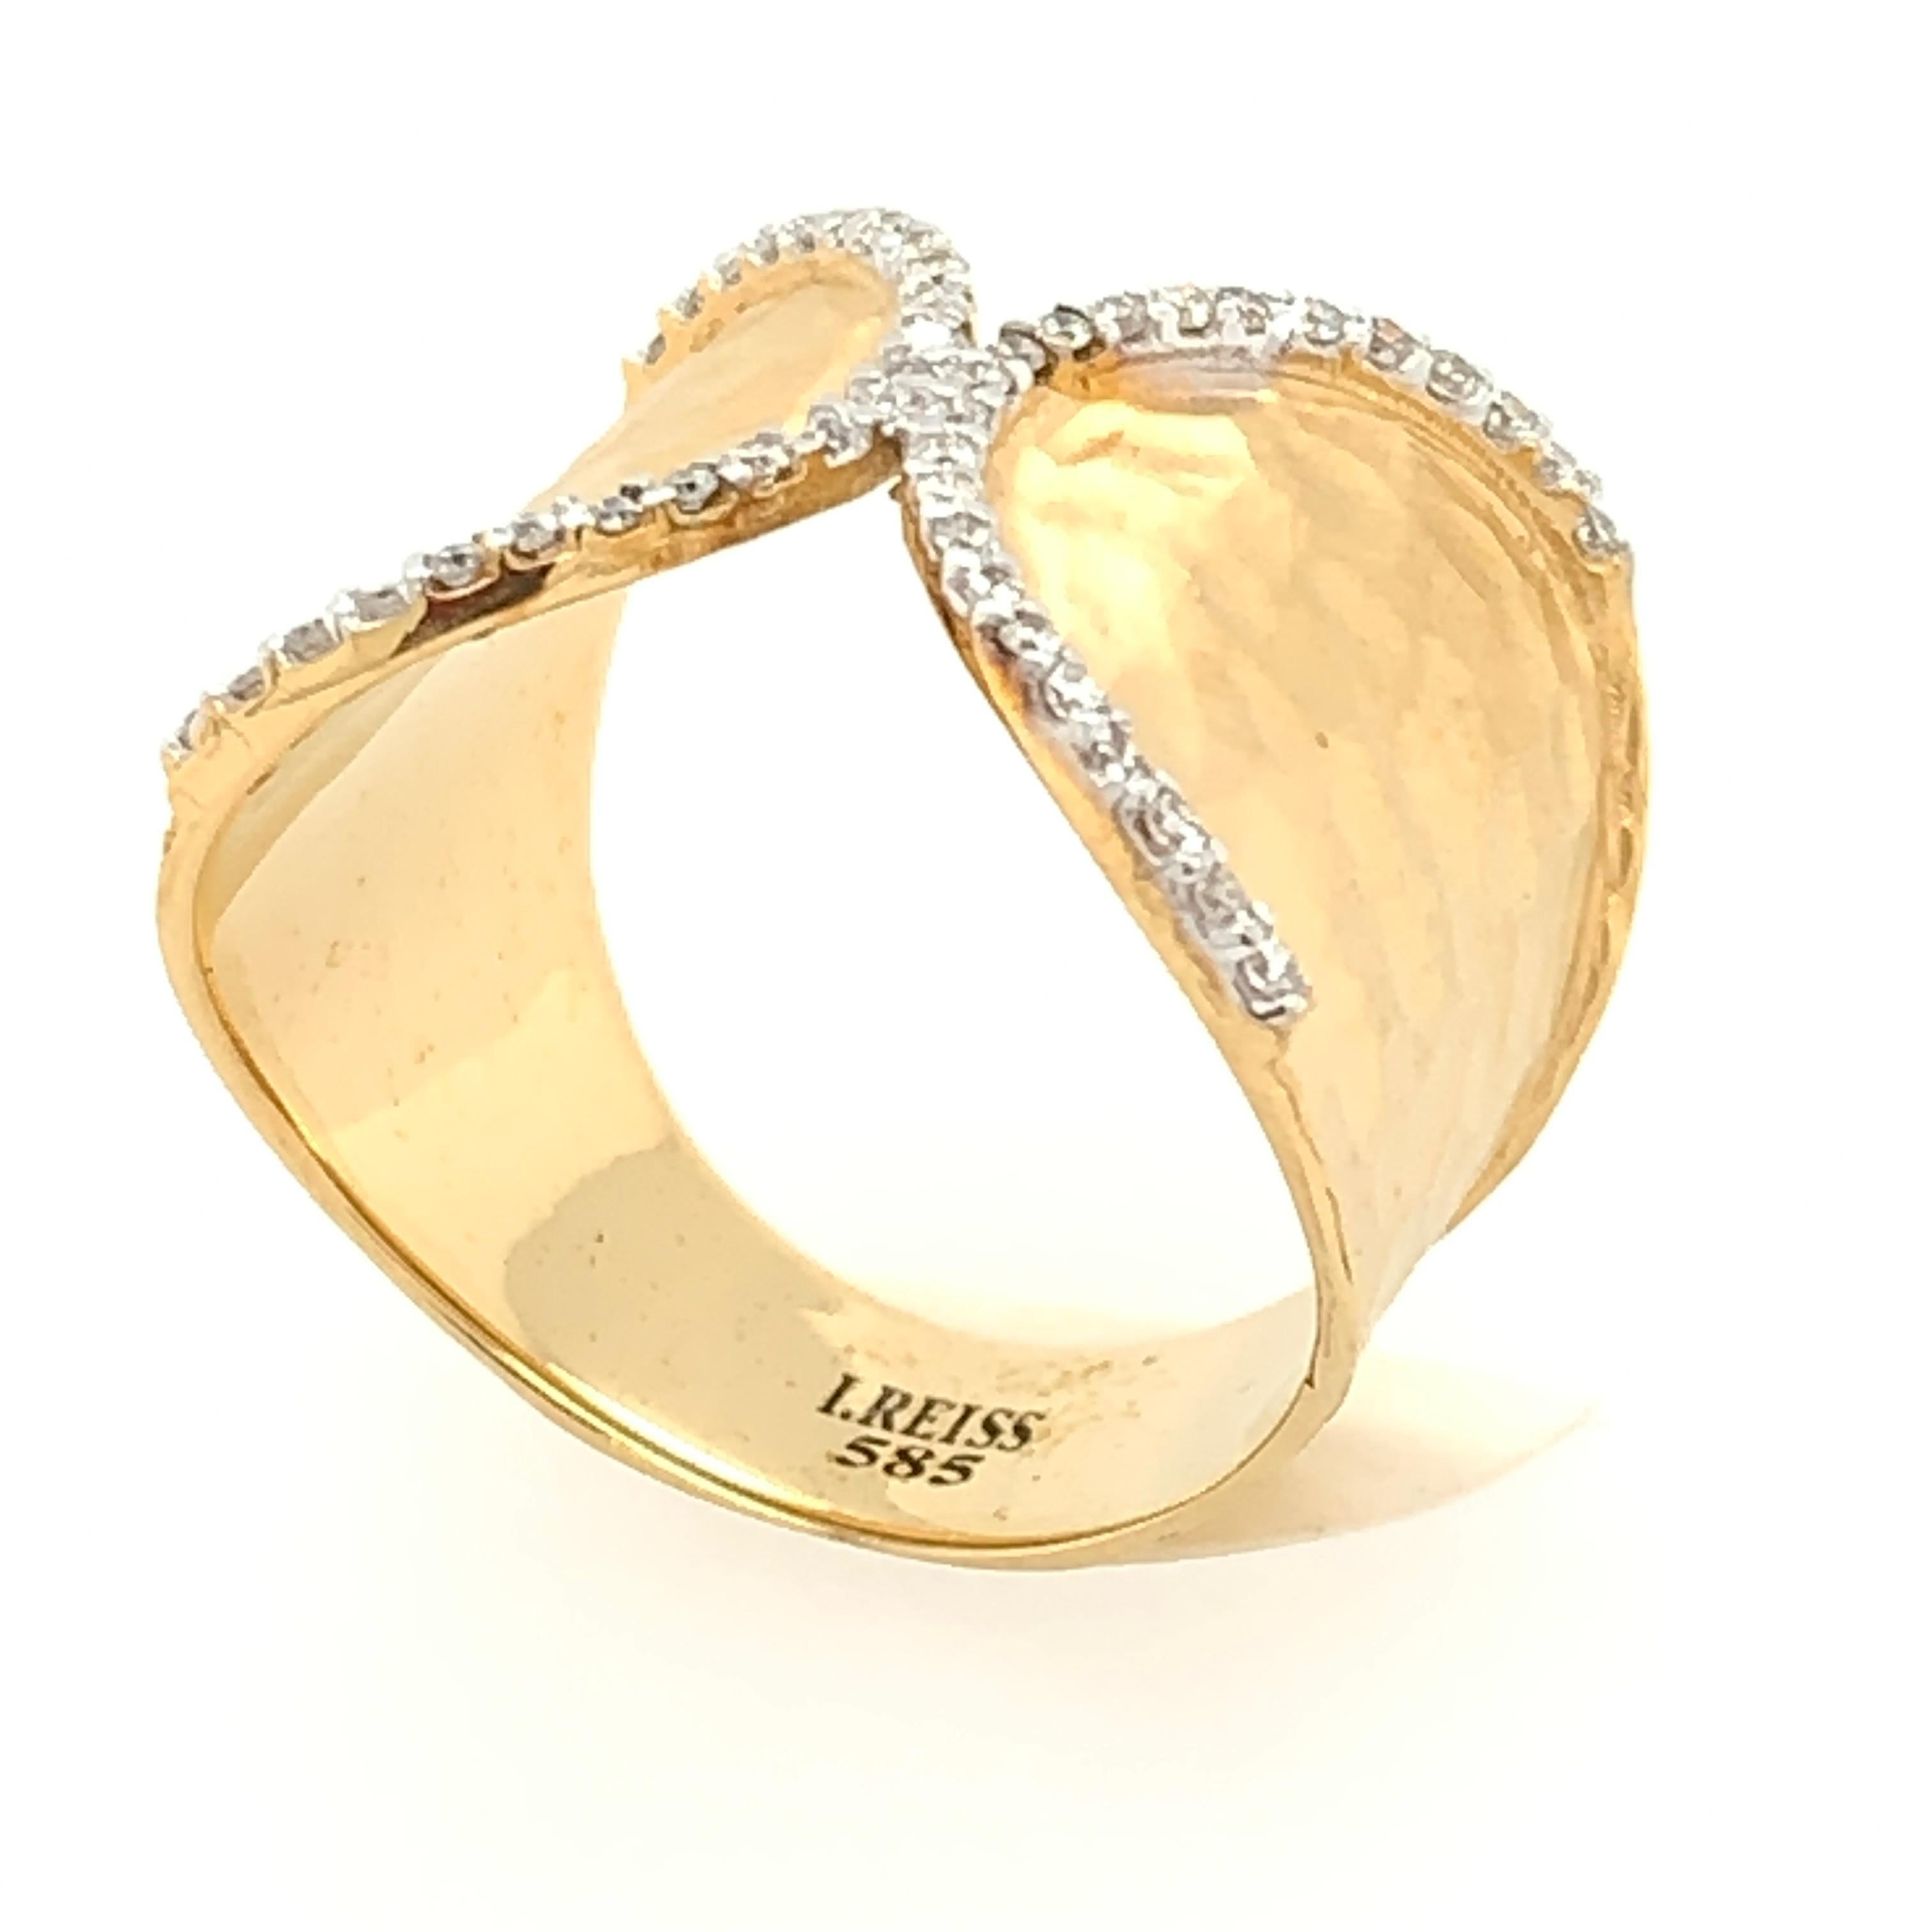 14 Karat Yellow Gold Matte and Hammer-Finished Horse-Shoe Cigar Ring, Enhanced with 0.28 Carats of Pave Set Diamonds.
